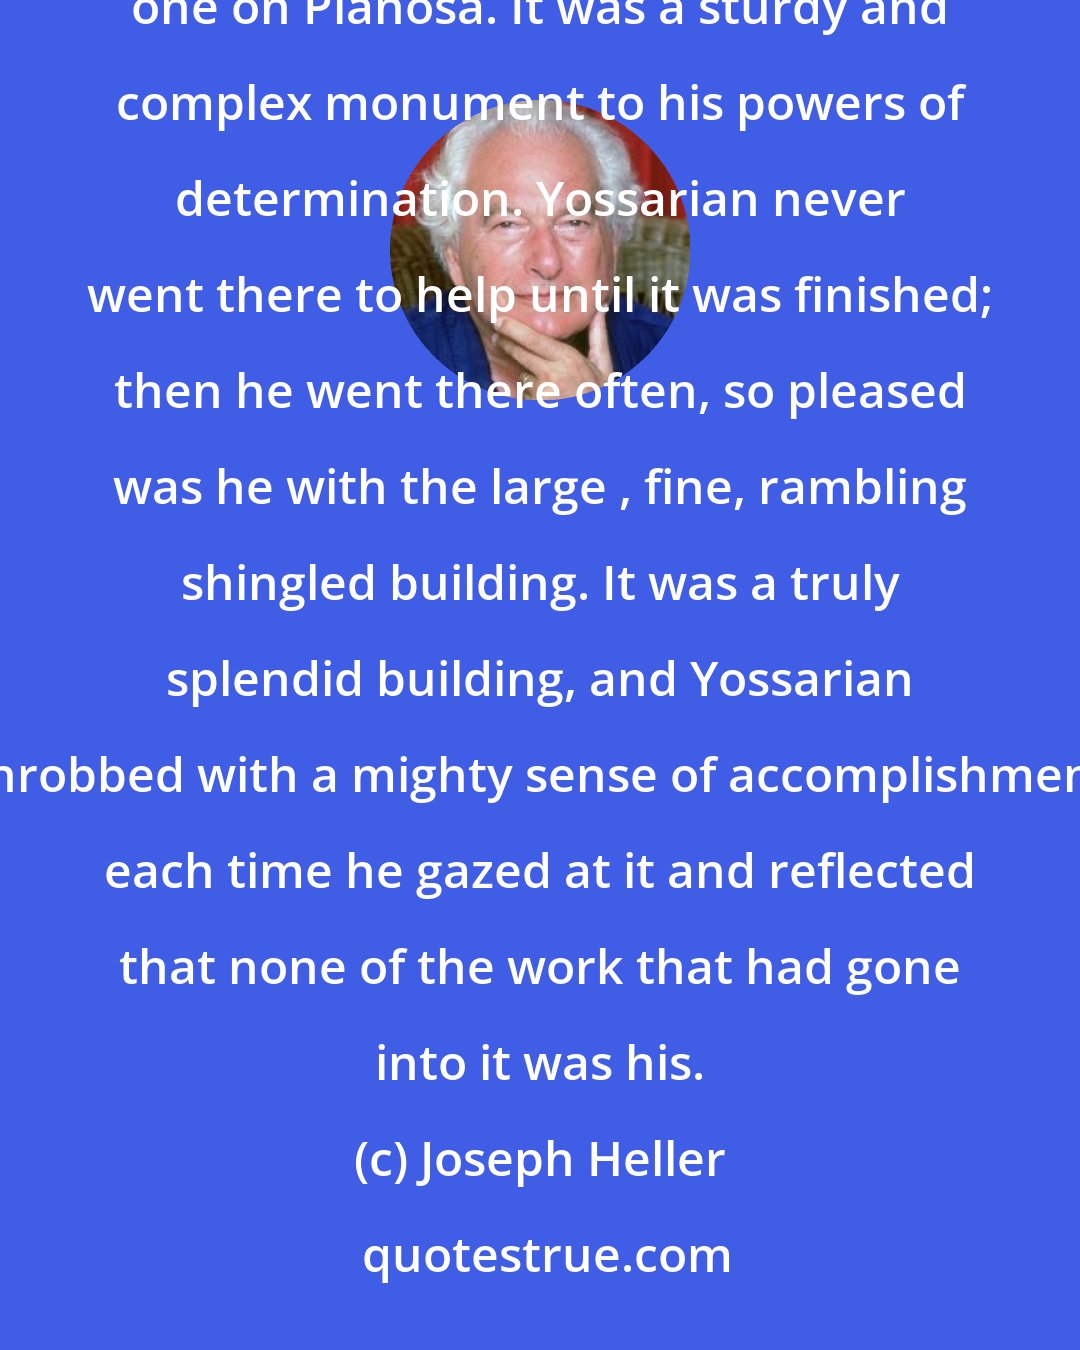 Joseph Heller: Actually there were many officers' clubs that Yossarian had not helped build, but he was proudest of the one on Pianosa. It was a sturdy and complex monument to his powers of determination. Yossarian never went there to help until it was finished; then he went there often, so pleased was he with the large , fine, rambling shingled building. It was a truly splendid building, and Yossarian throbbed with a mighty sense of accomplishment each time he gazed at it and reflected that none of the work that had gone into it was his.